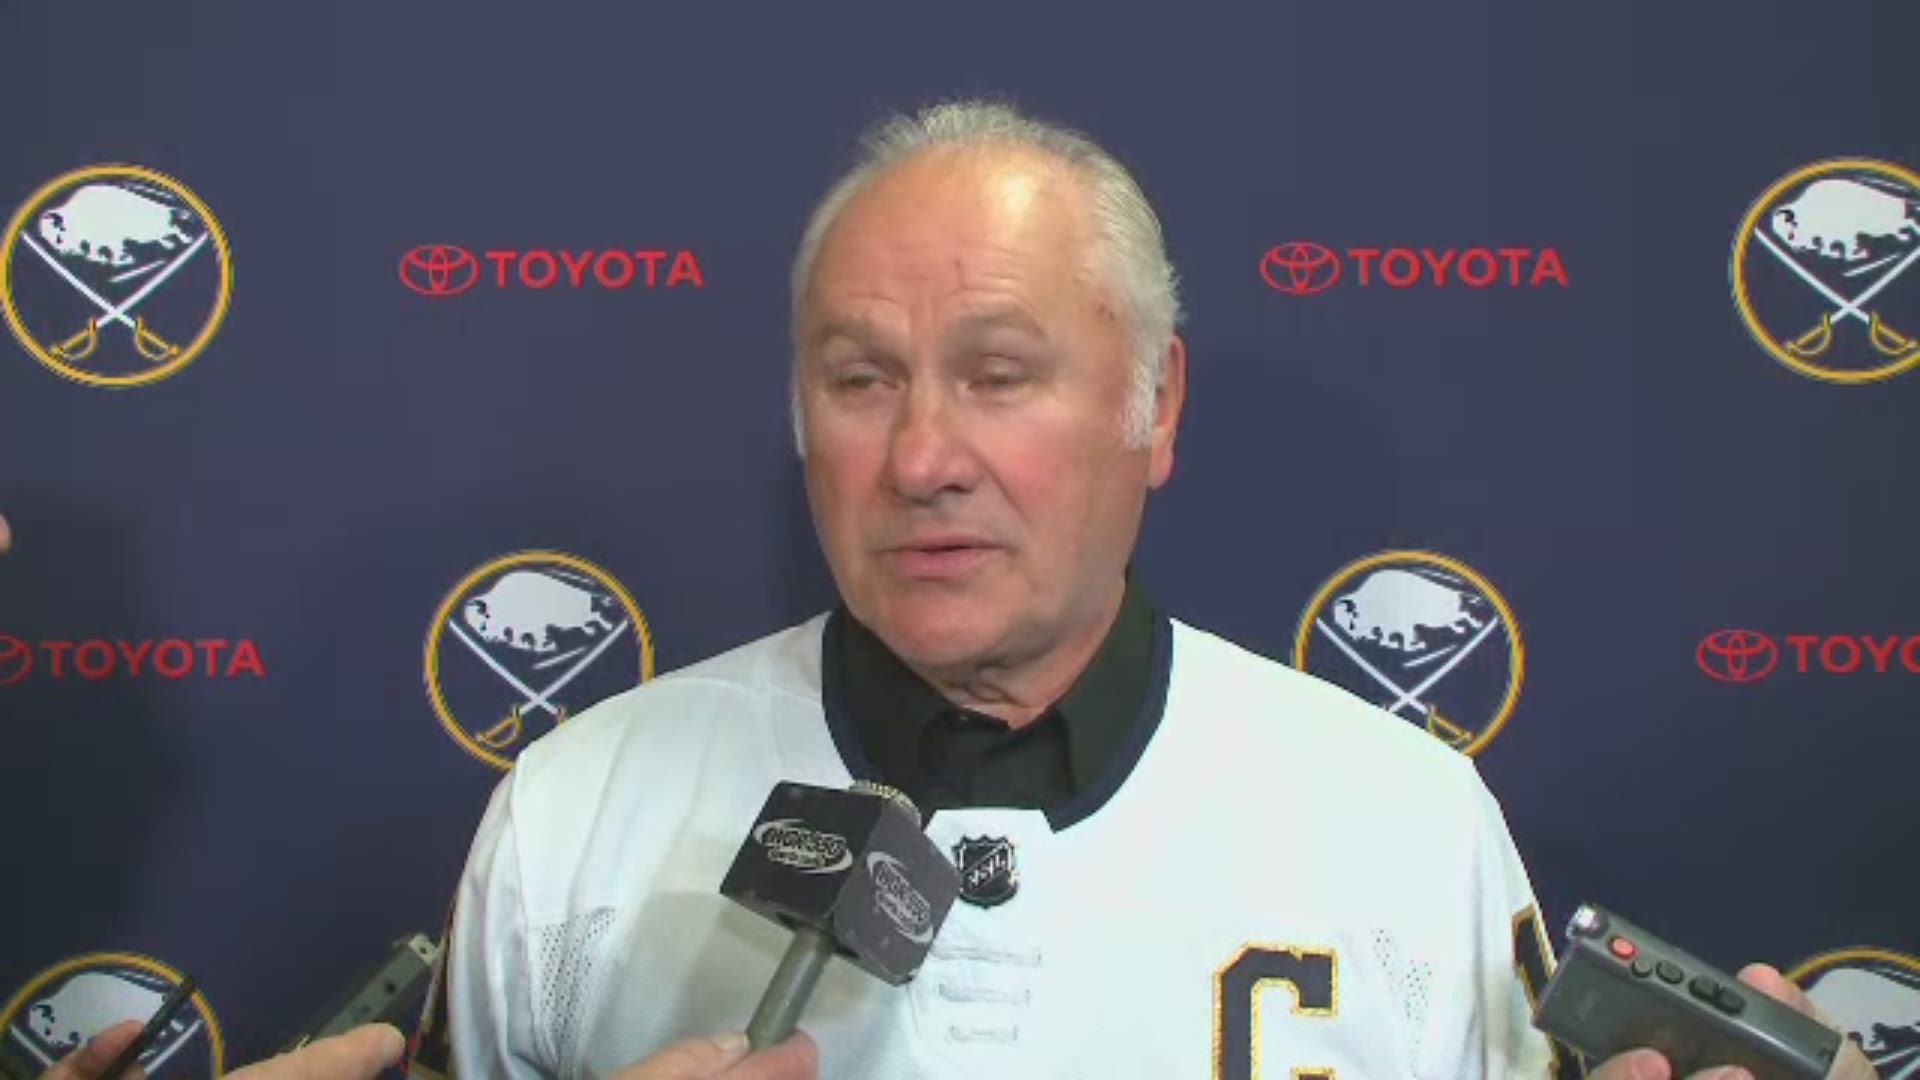 Former Sabres captains share their joy at being part of the Sabres Golden Season, the 50 year anniversary of the franchise.